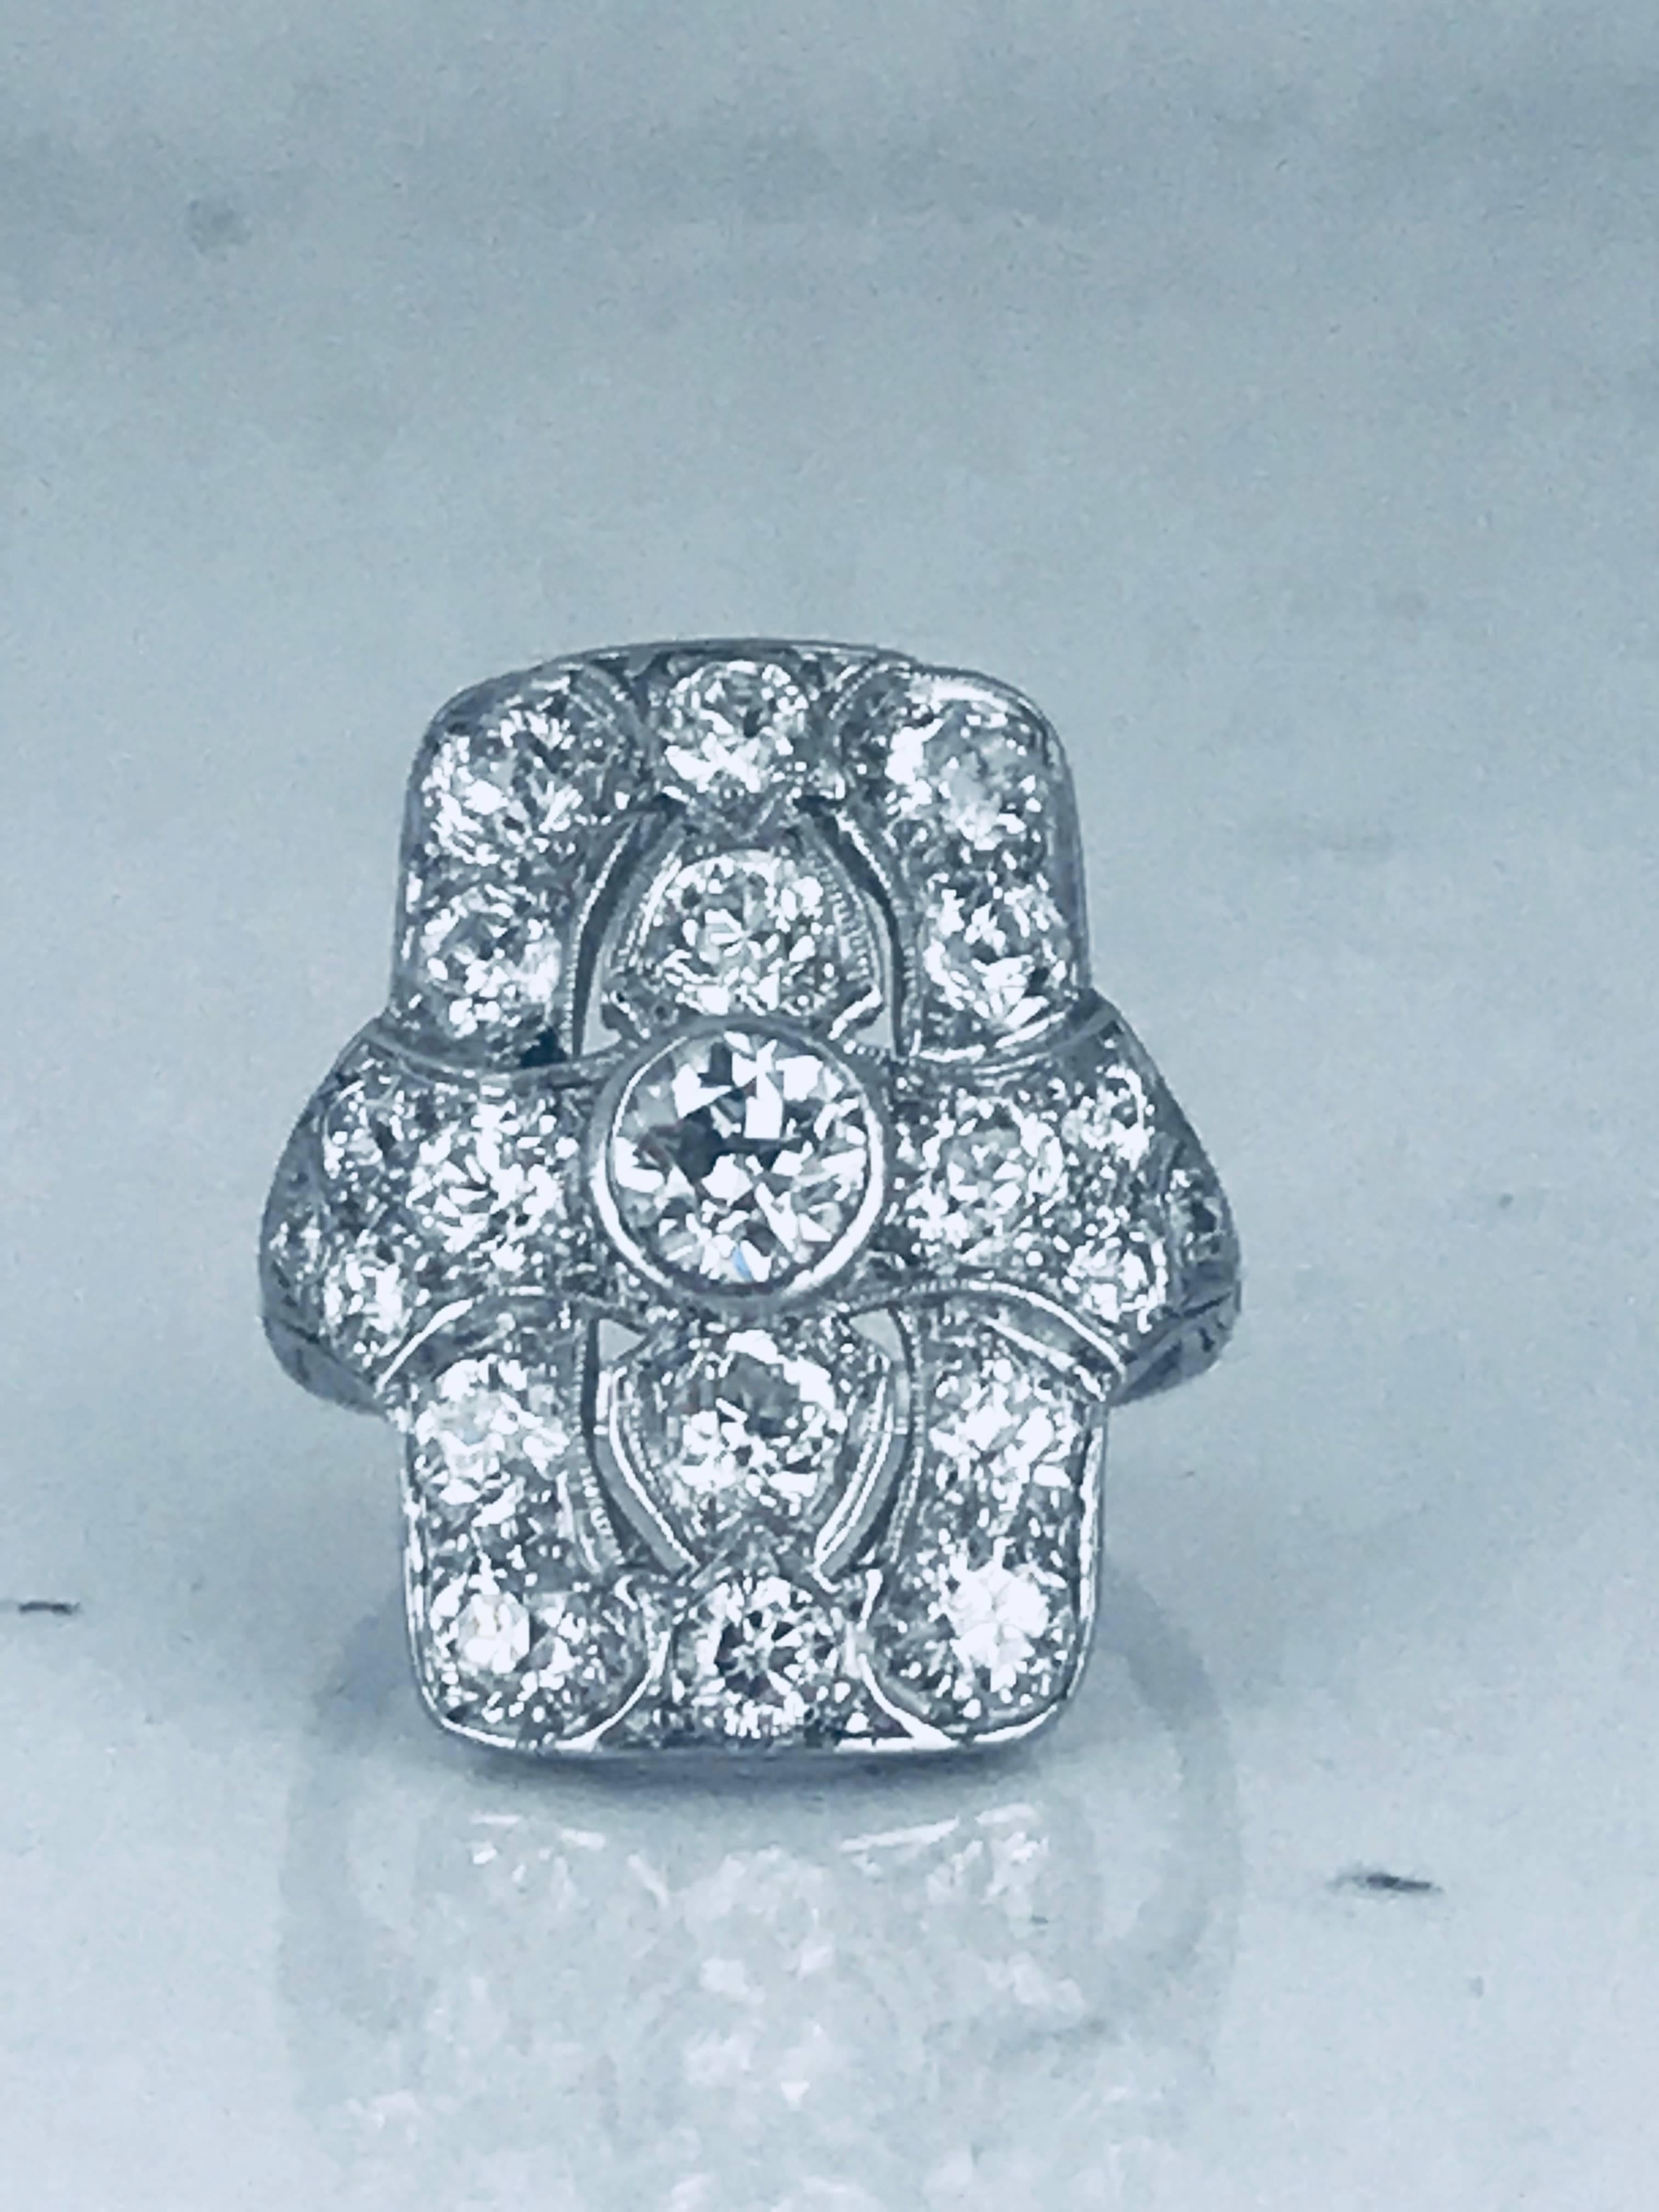 
One platinum, Deco estate diamond ring. Circa is 1915
The ring consists of diamonds that are 'European' cuts ranging in sizes from 2.50 x 5.30  mm in diameter.

The weight of the diamonds is approximately 2.87 carats total.
The following are the